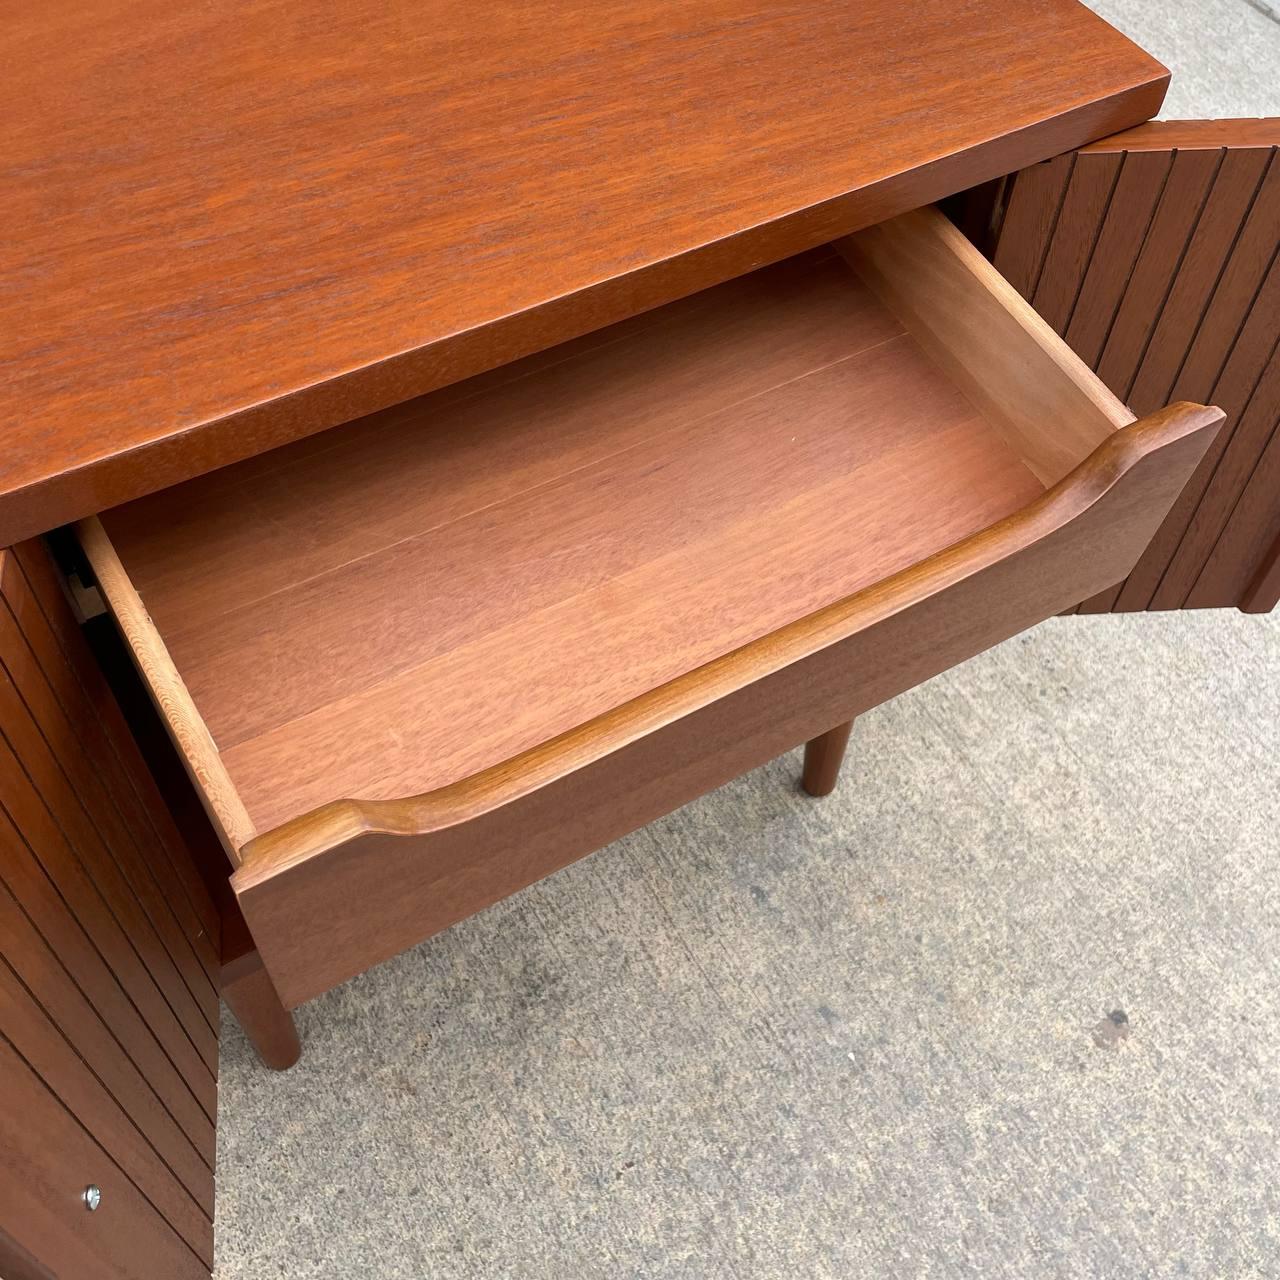 Newly Refinished - Pair of Mid-Century Modern Walnut Night Stands by Basic-Witz 4